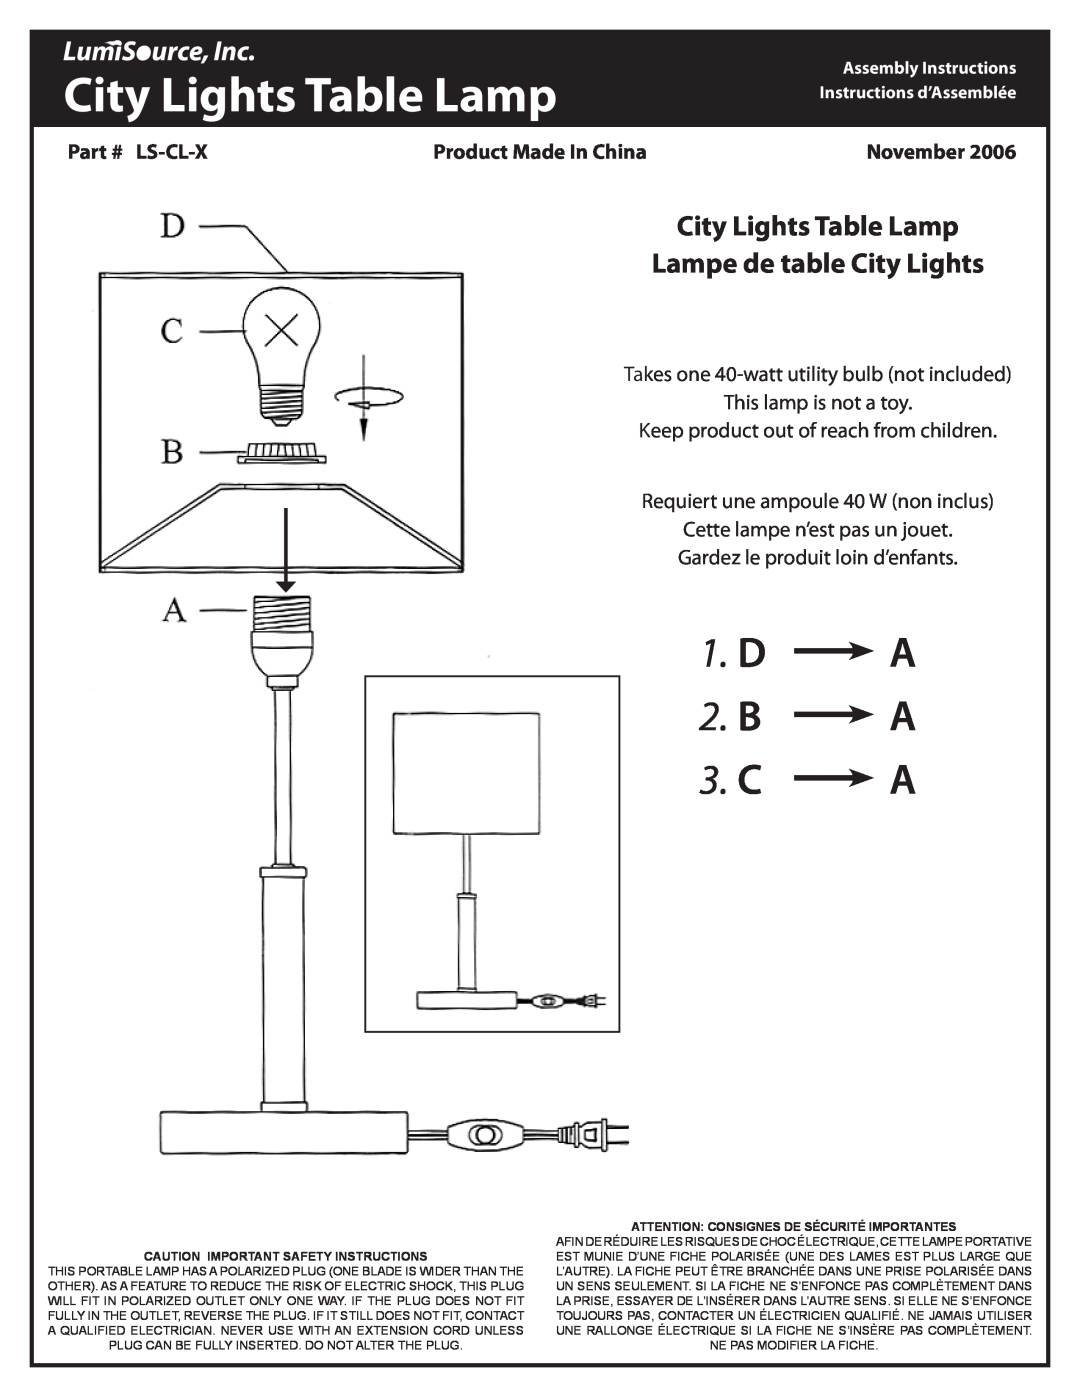 LumiSource LS-CL-X important safety instructions City Lights Table Lamp, D A 2. B A 3. C A, Ls-Cl-X, Product Made In China 